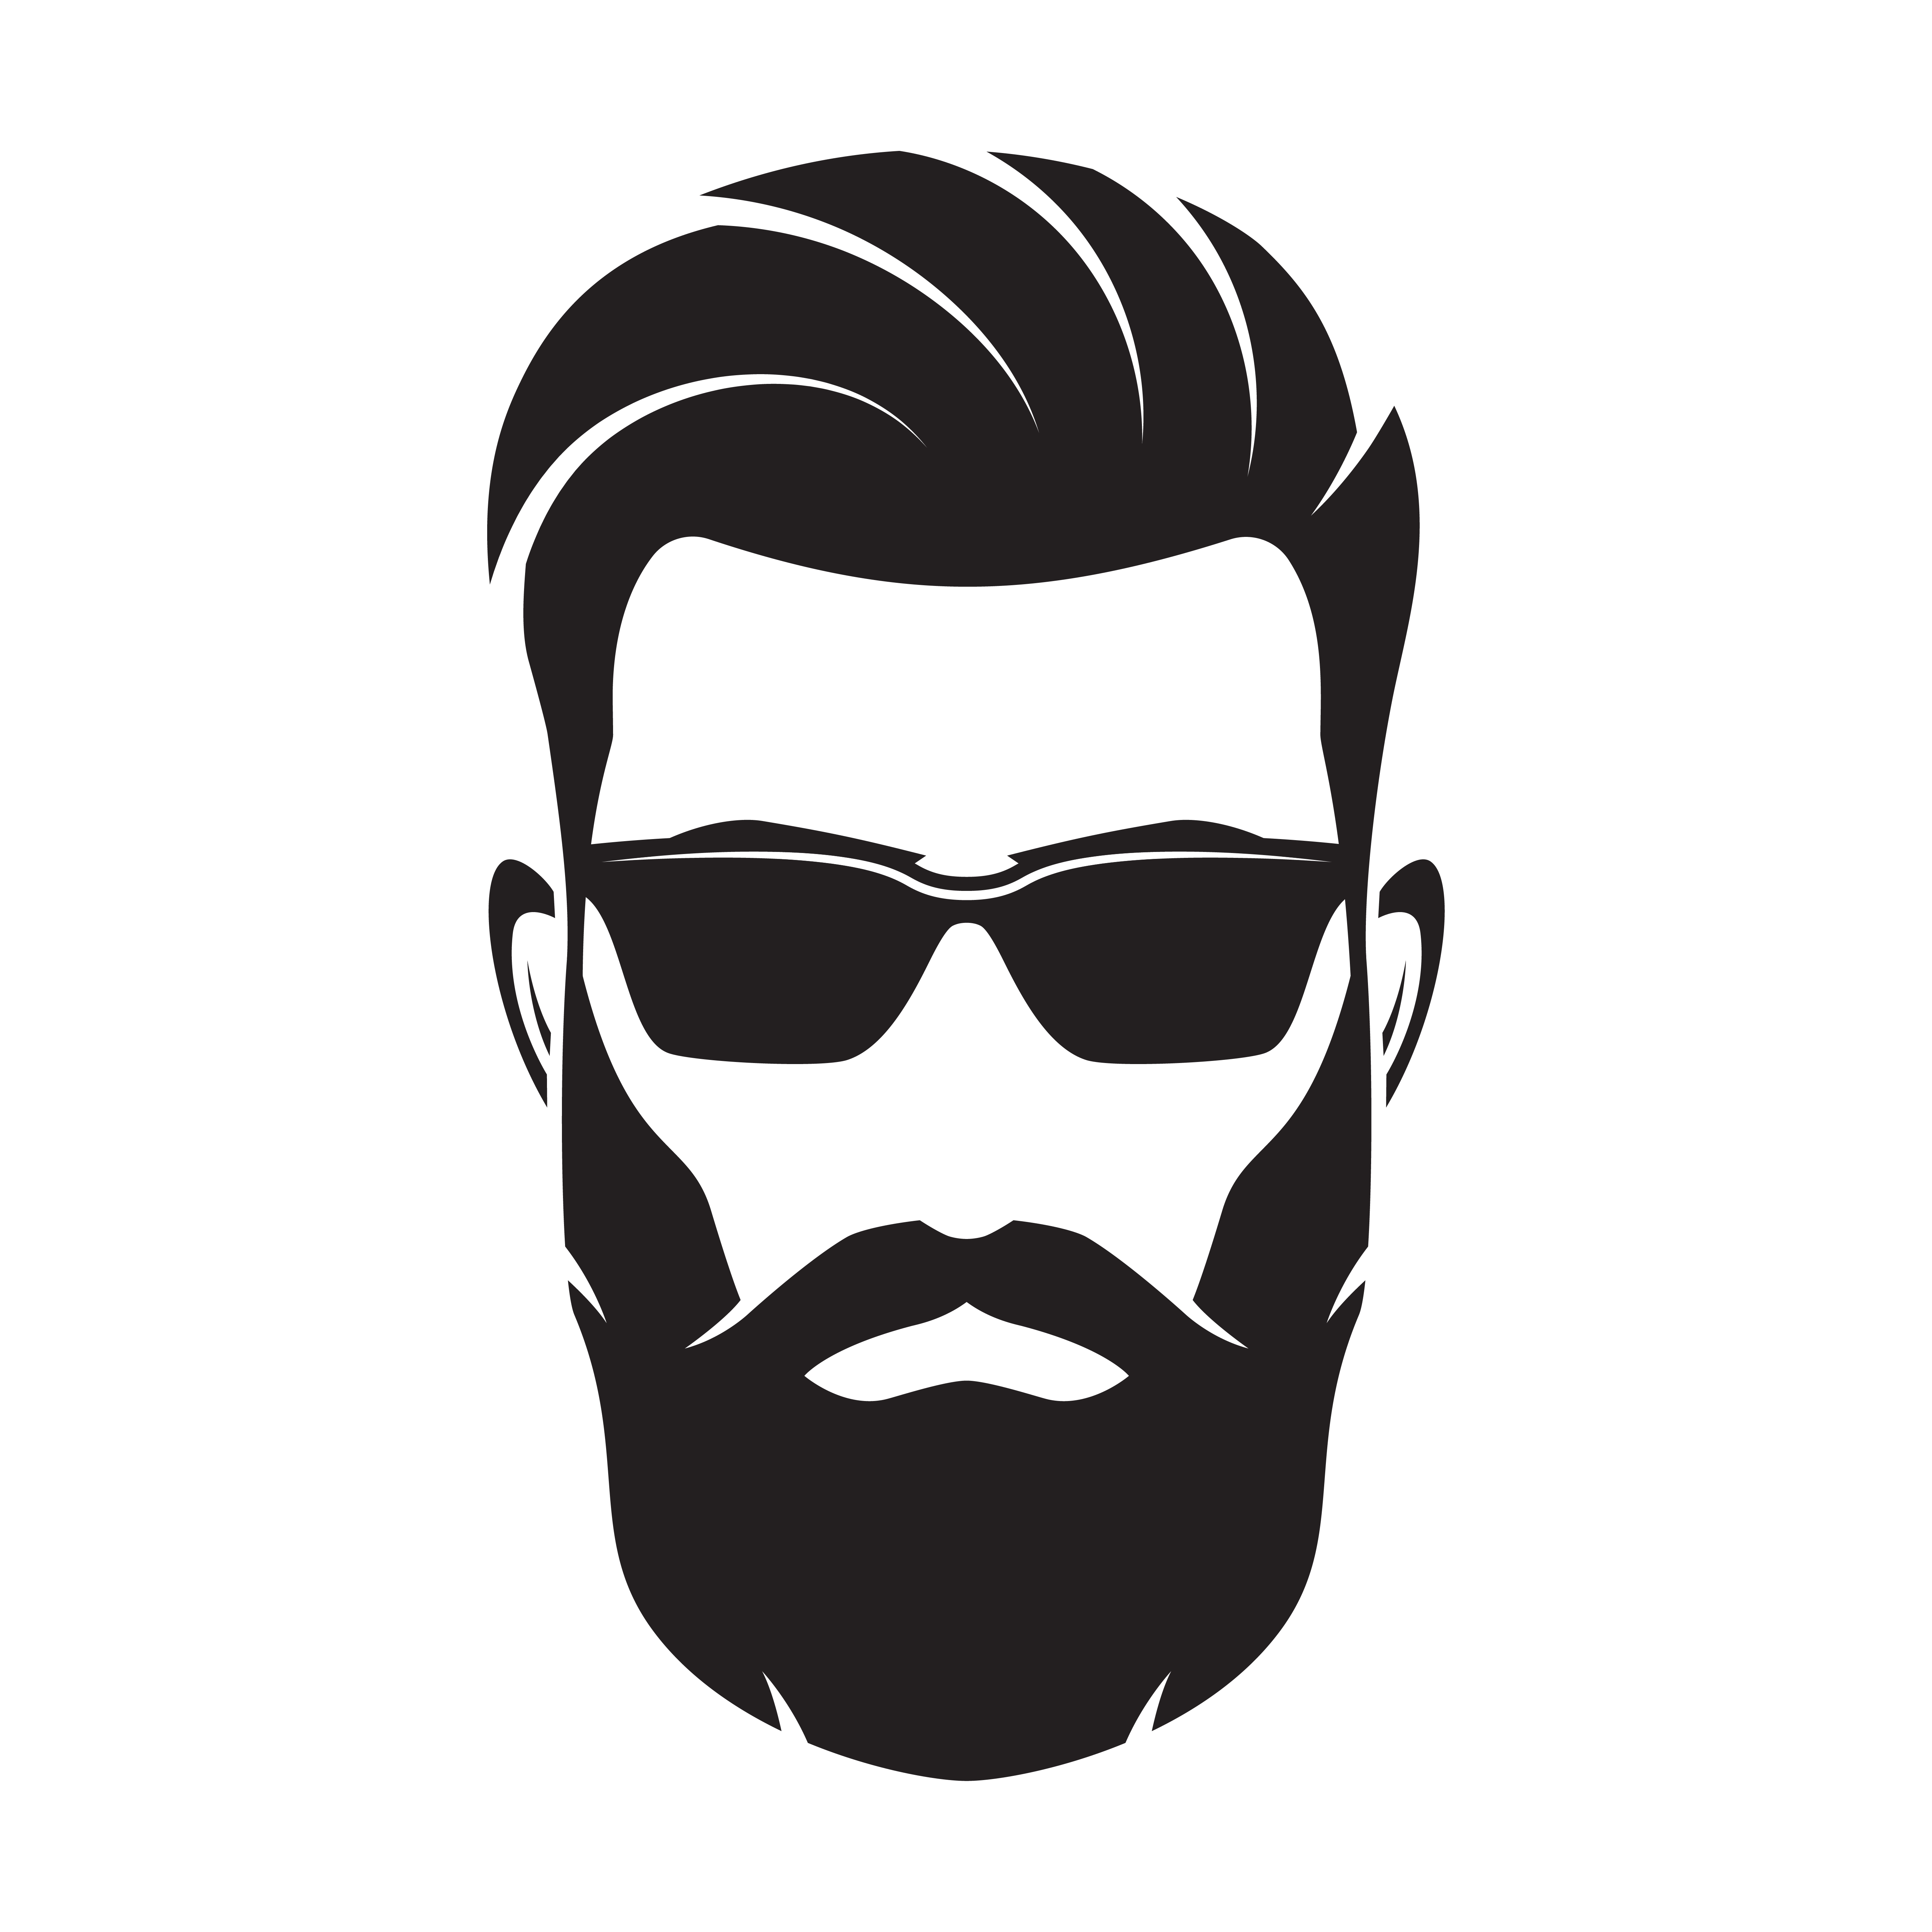 Beard Products Blog Reveals The Best Male Grooming Techniques